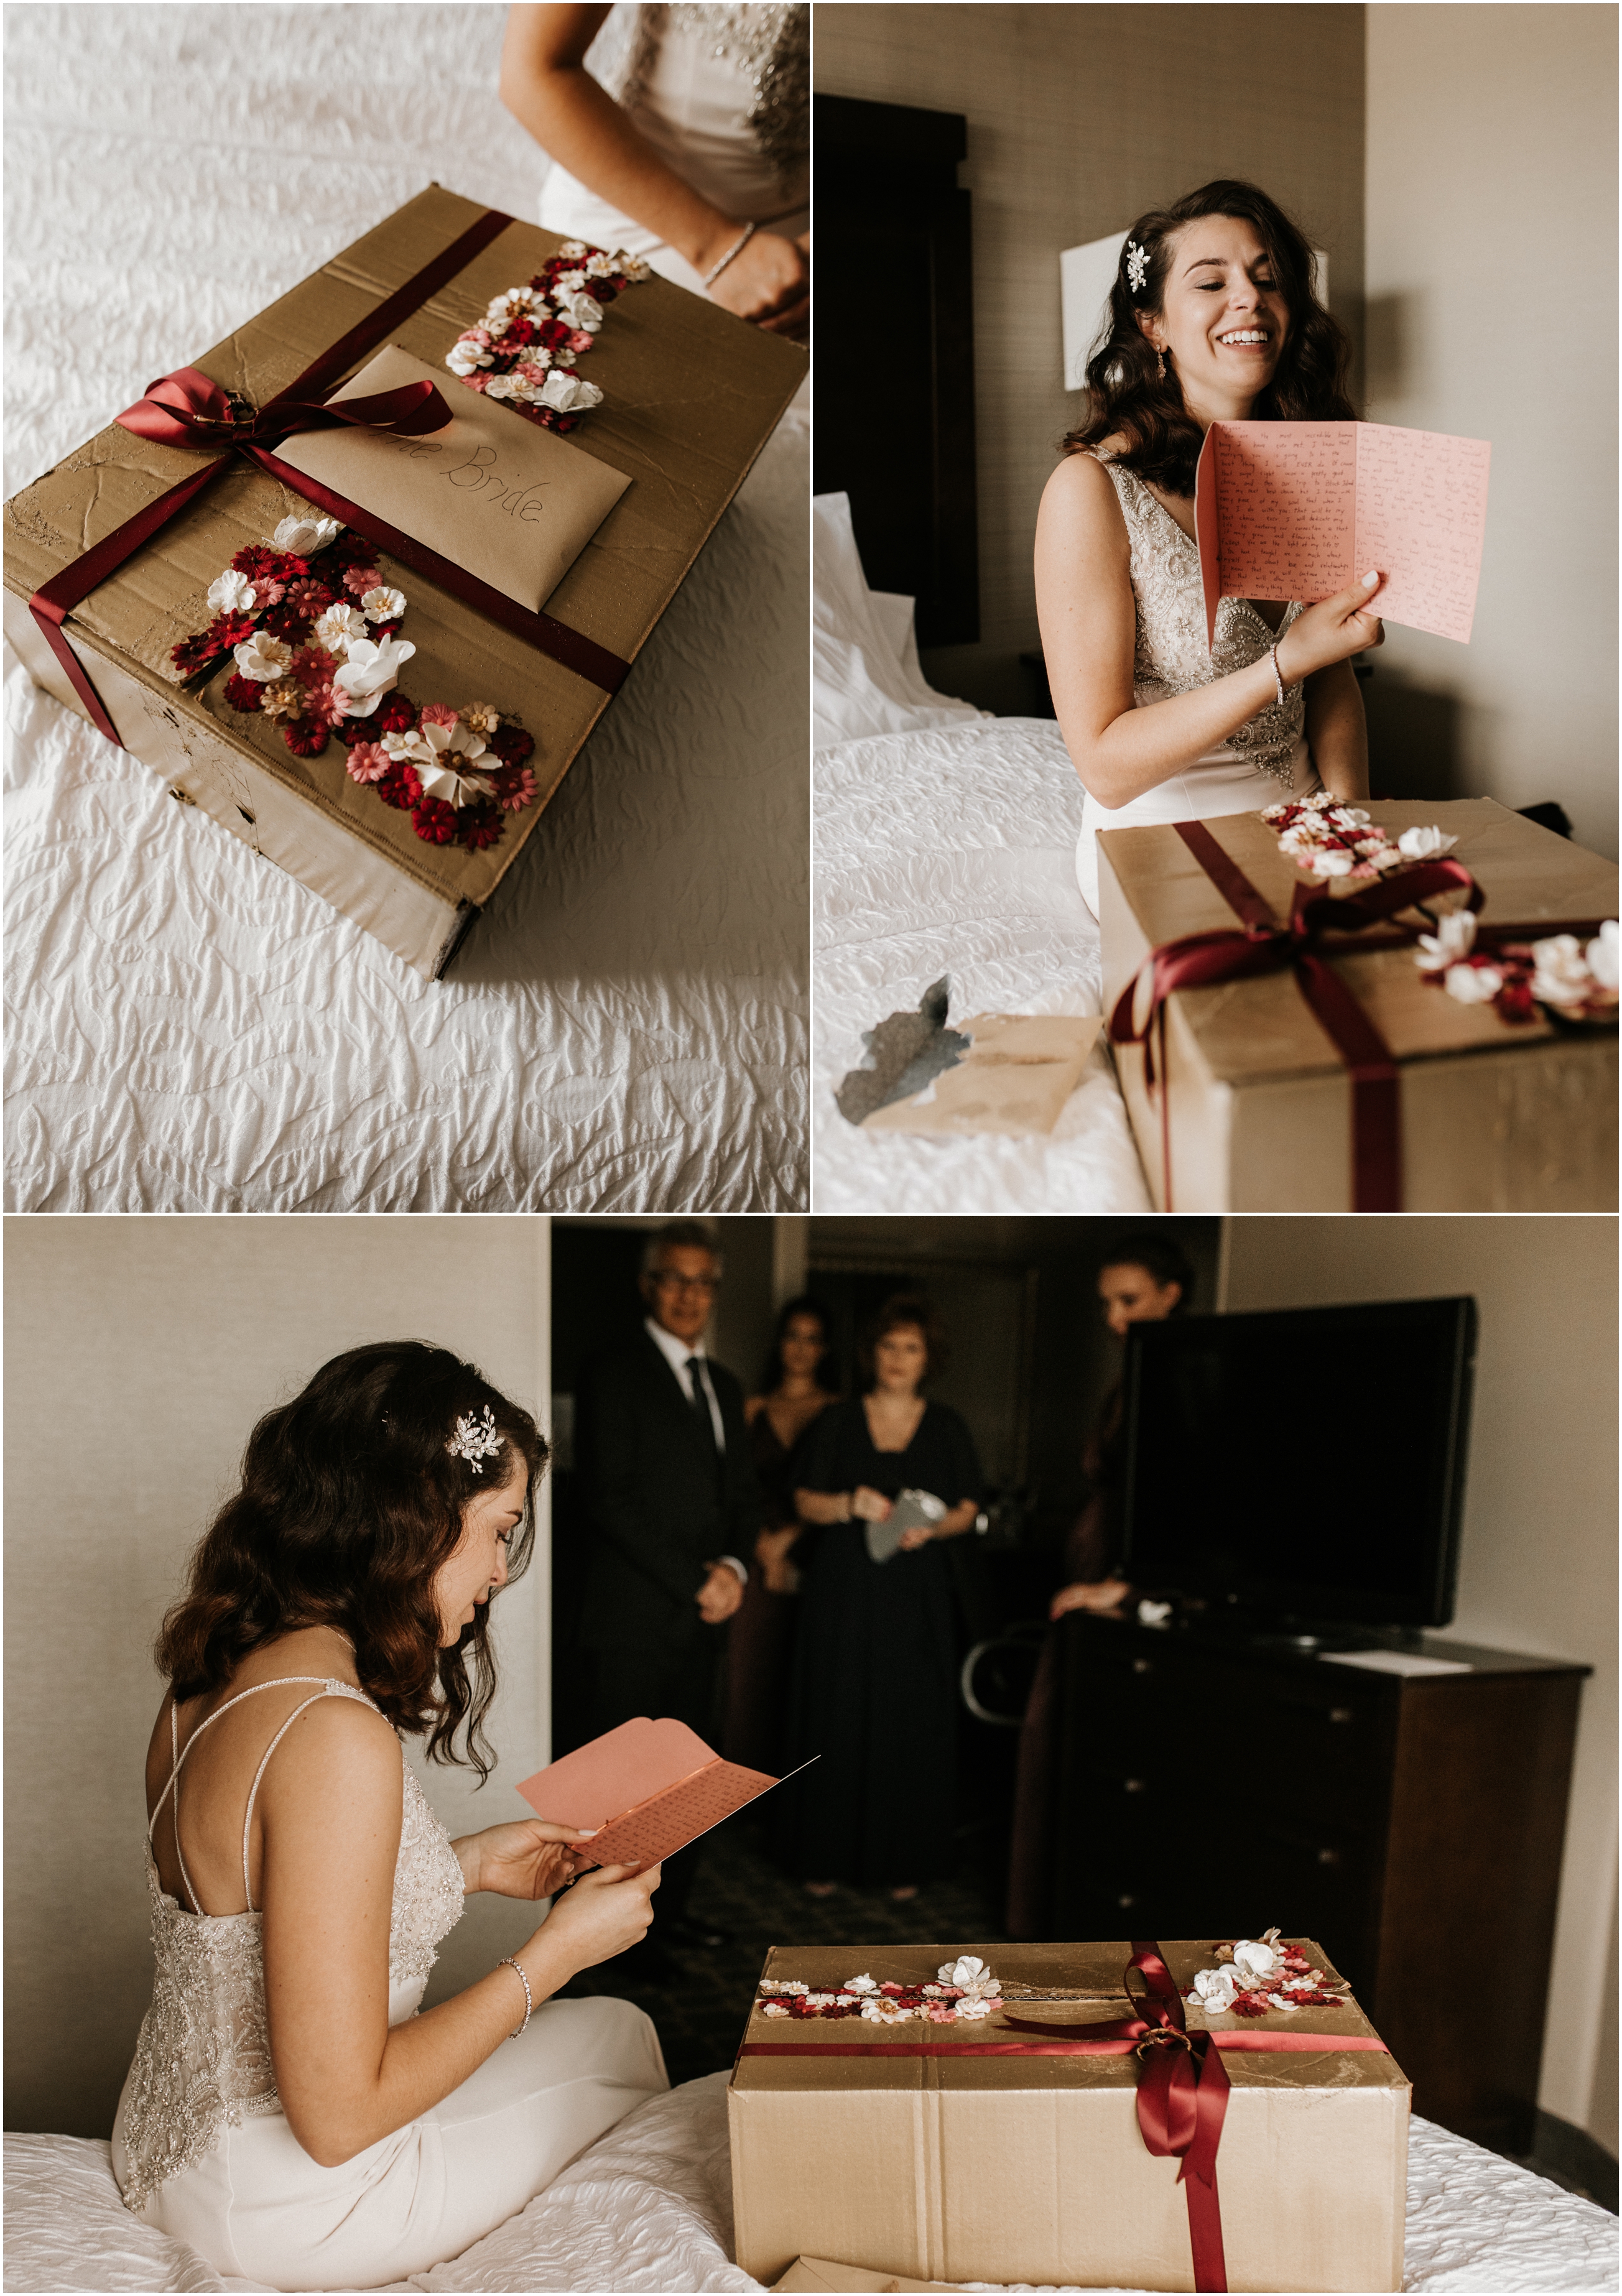 bride opening gifts from husband-to-be